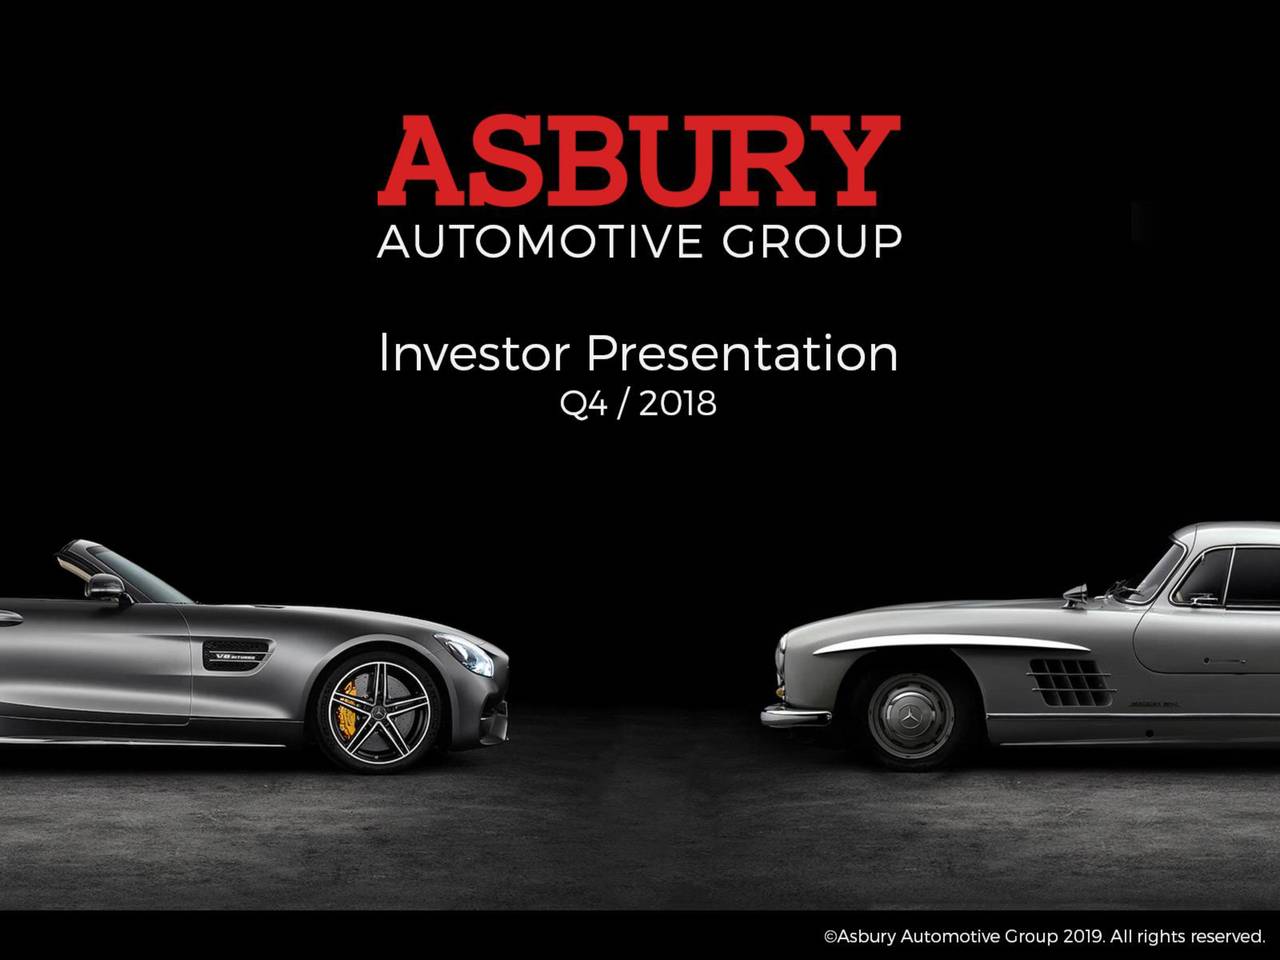 © Asbury Automotive Group 2019. All rights reserved.